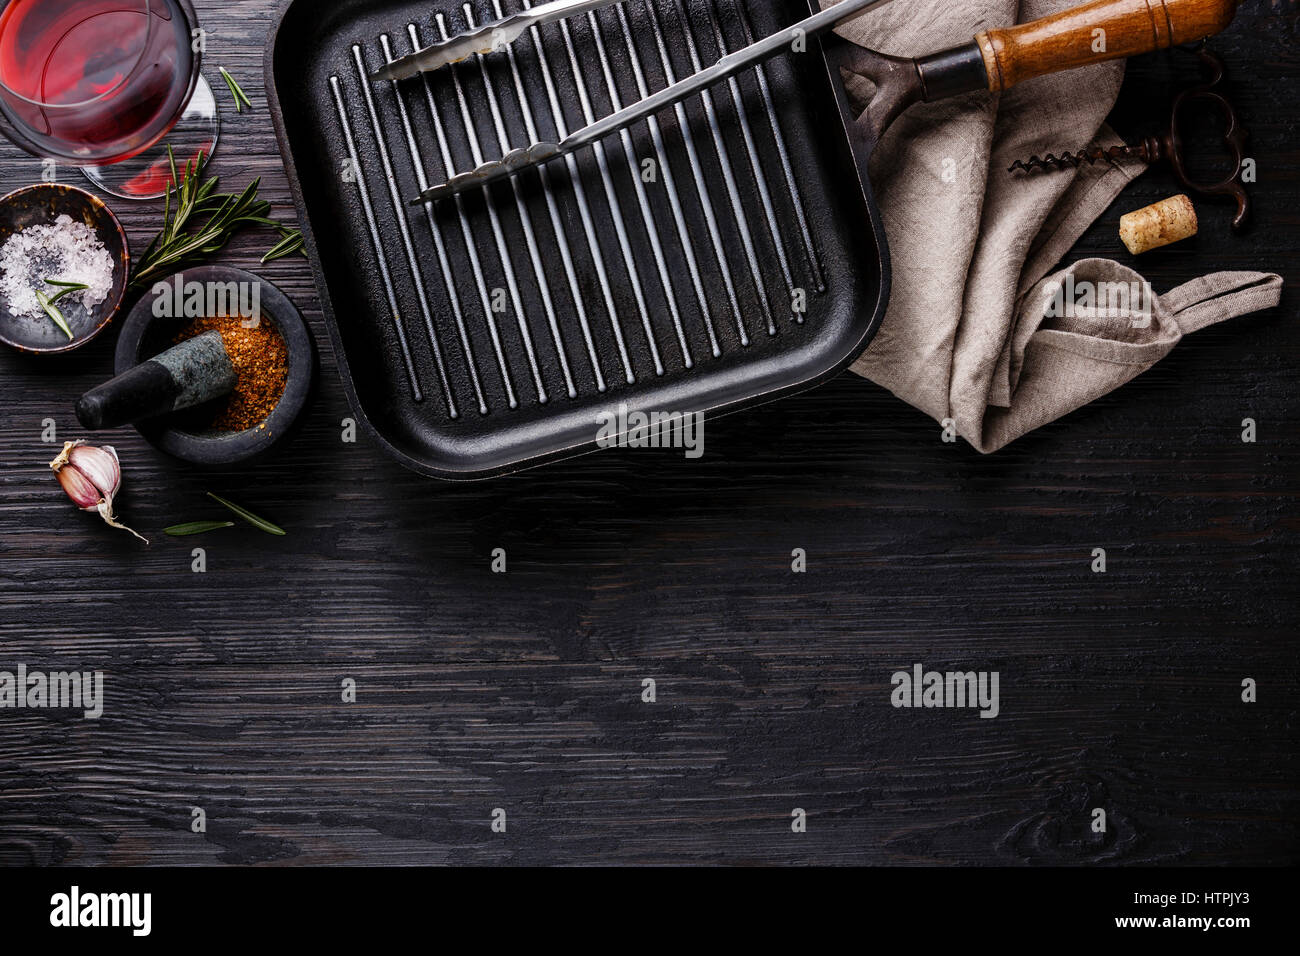 Empty frying pan, seasonings and red wine on black burned wooden background copy space Stock Photo